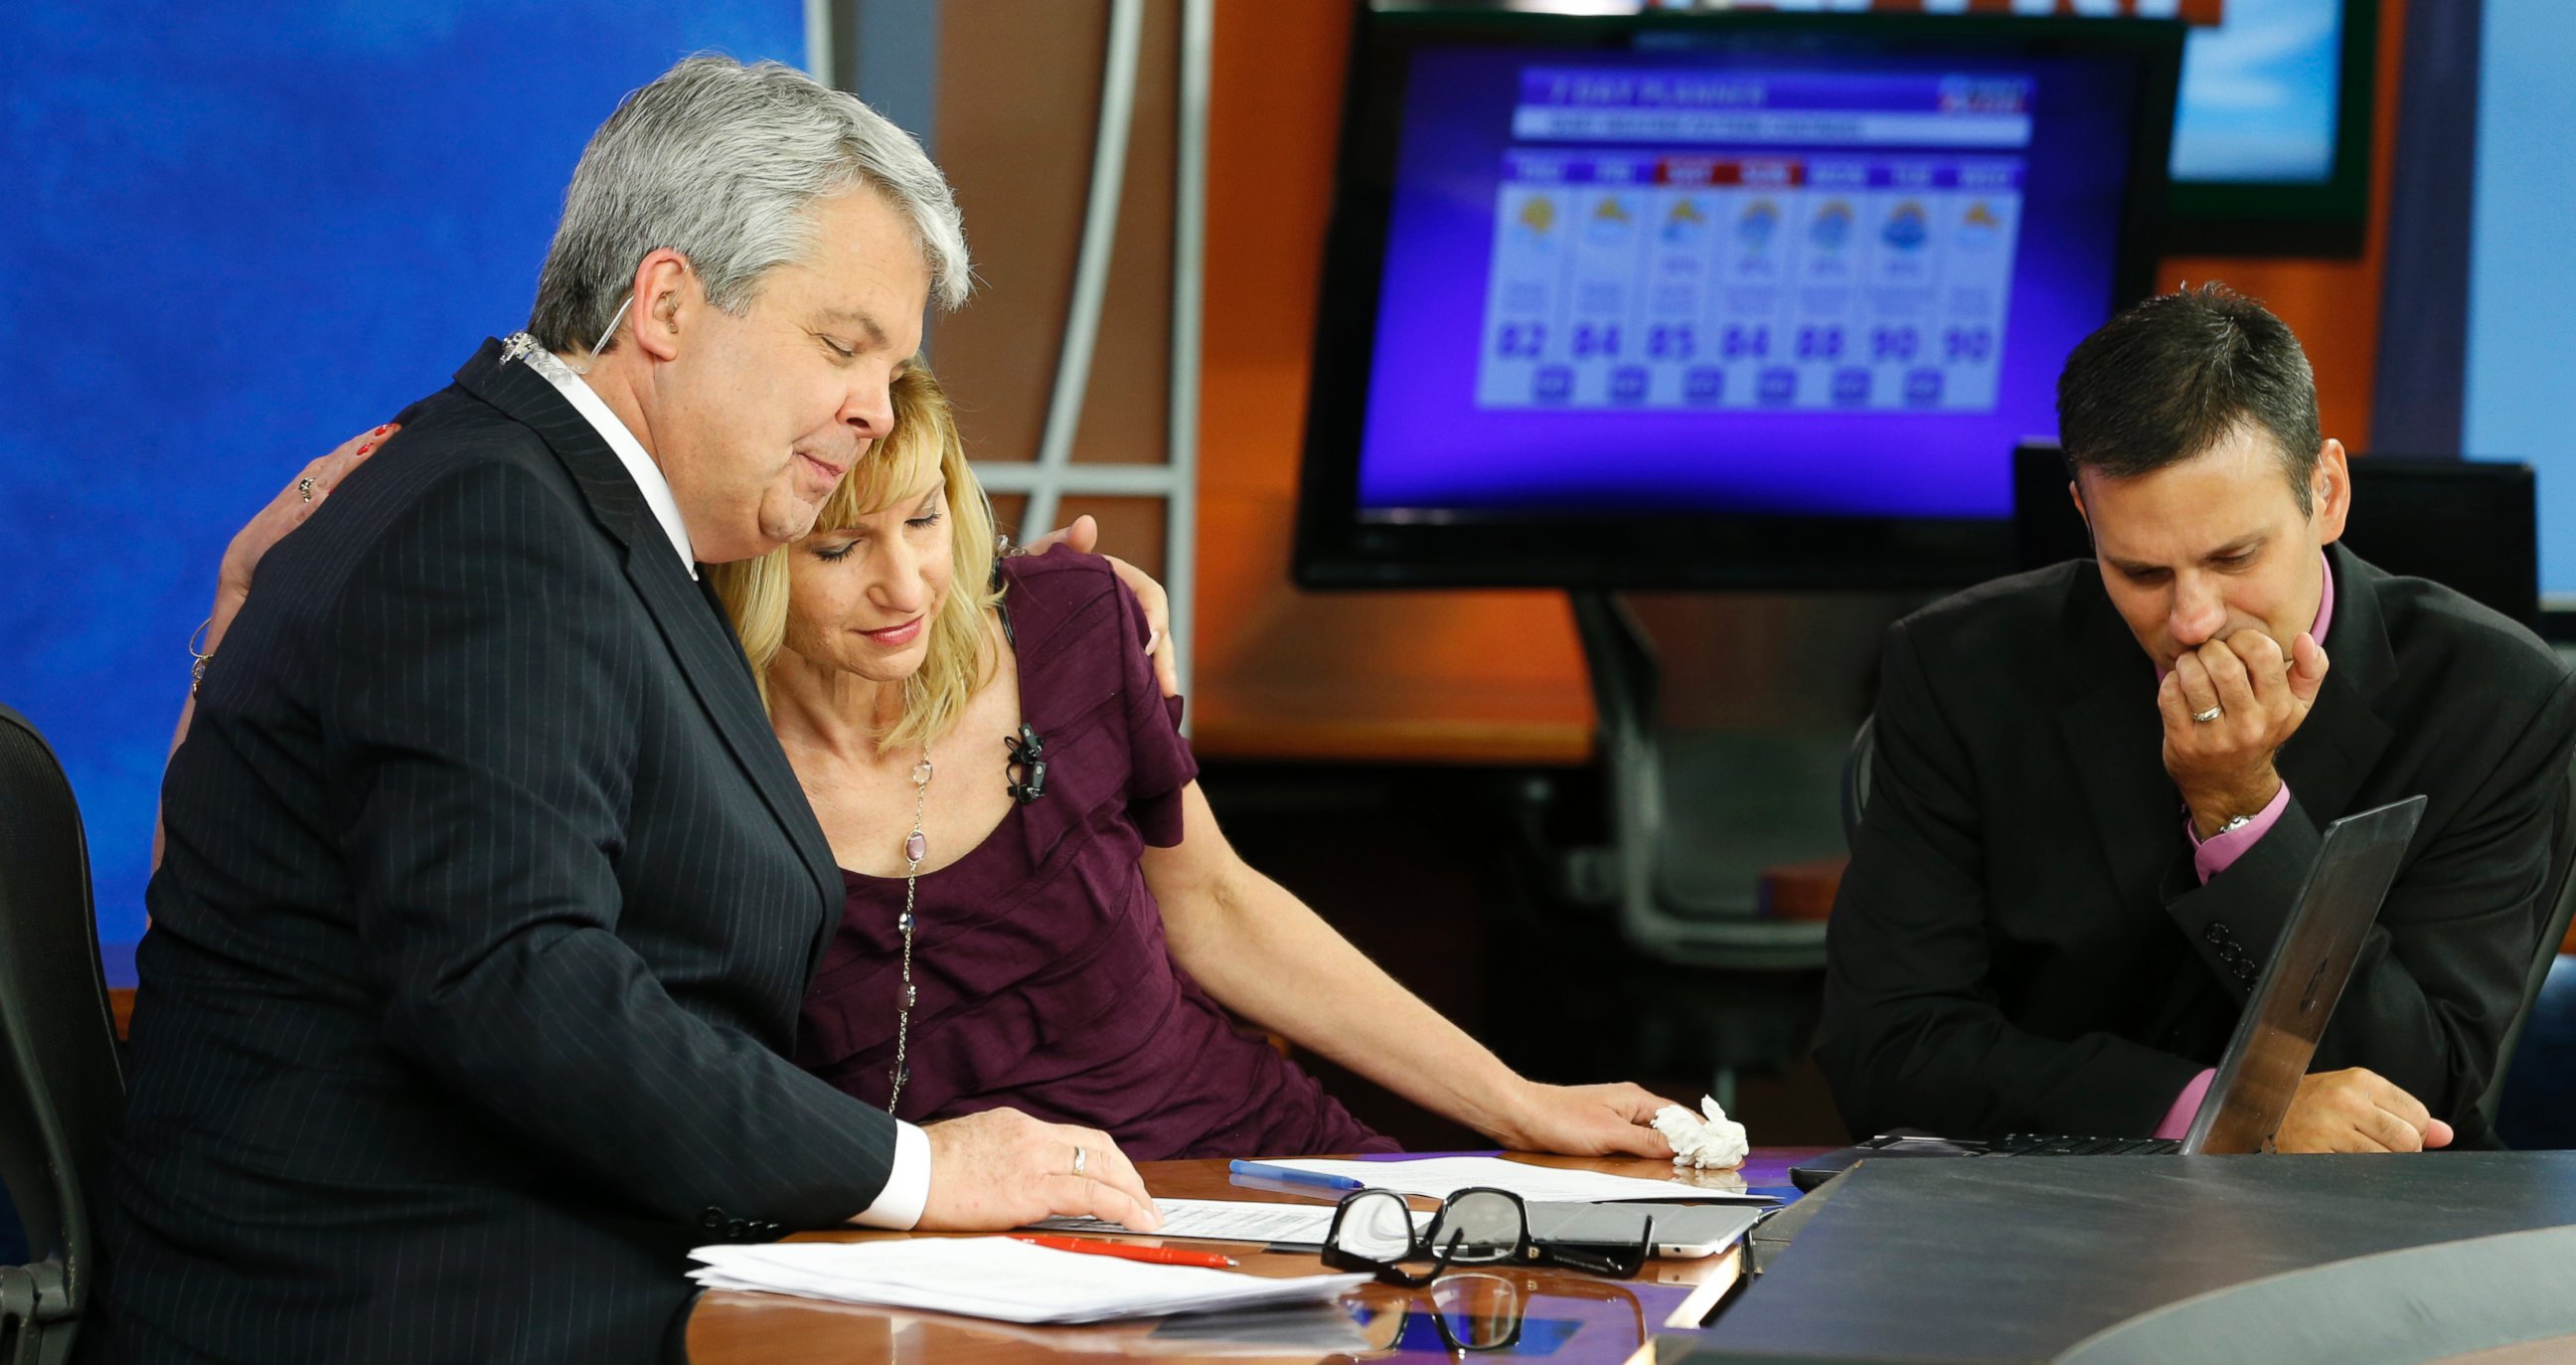 PHOTO:WDBJ-TV7 news morning anchor Kimberly McBroom, center, gets a hug from visiting anchor Steve Grant, left, as meteorologist Leo Hirsbrunner reflects after their early morning newscast at the station, Aug. 27, 2015, in Roanoke, Va.   